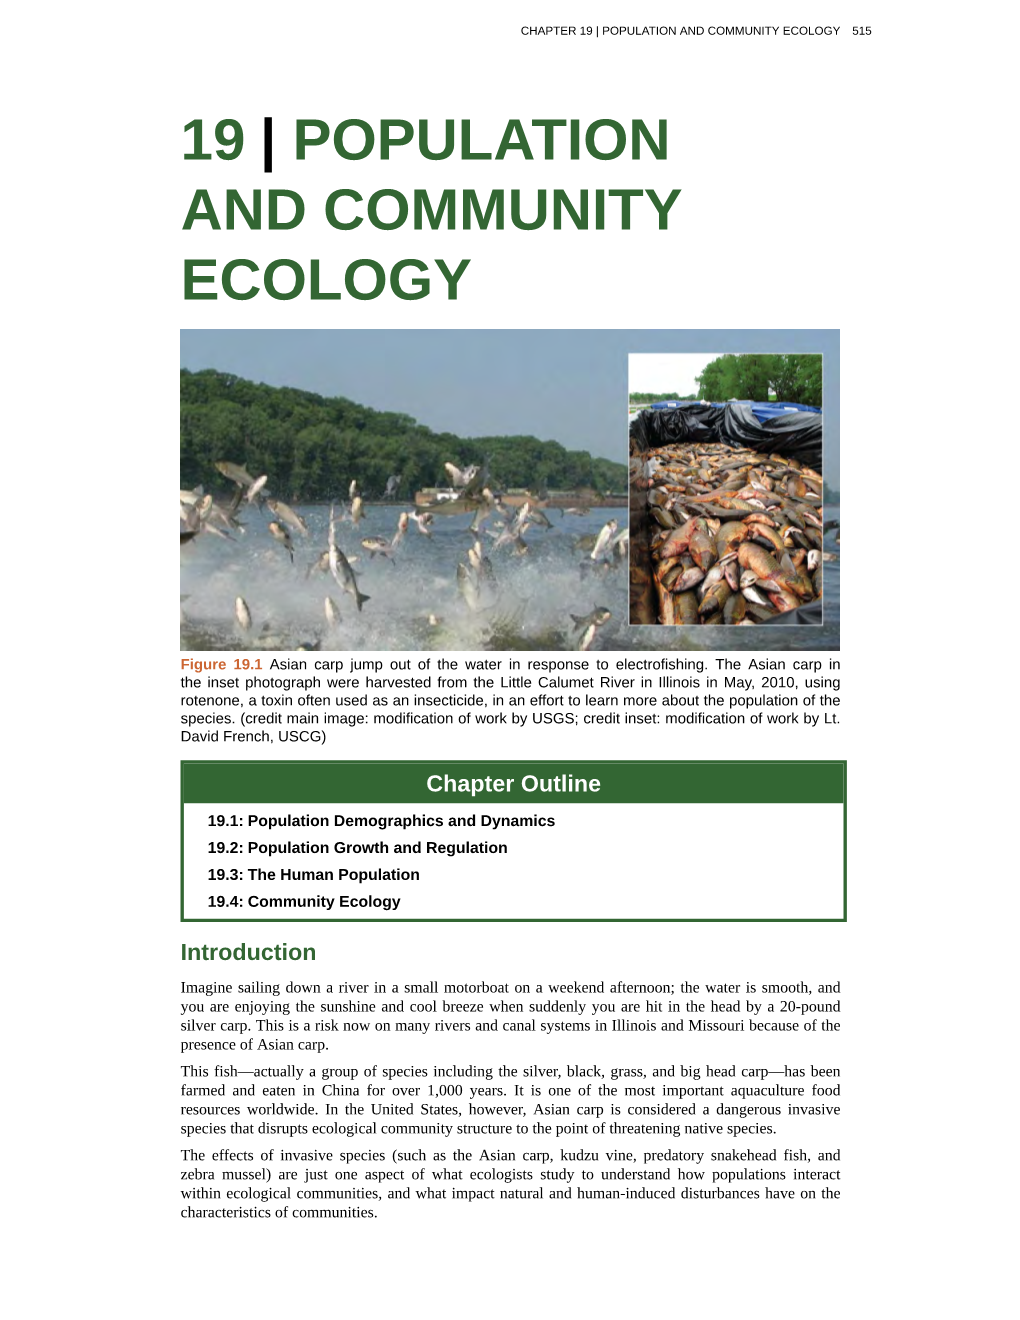 19 | Population and Community Ecology 515